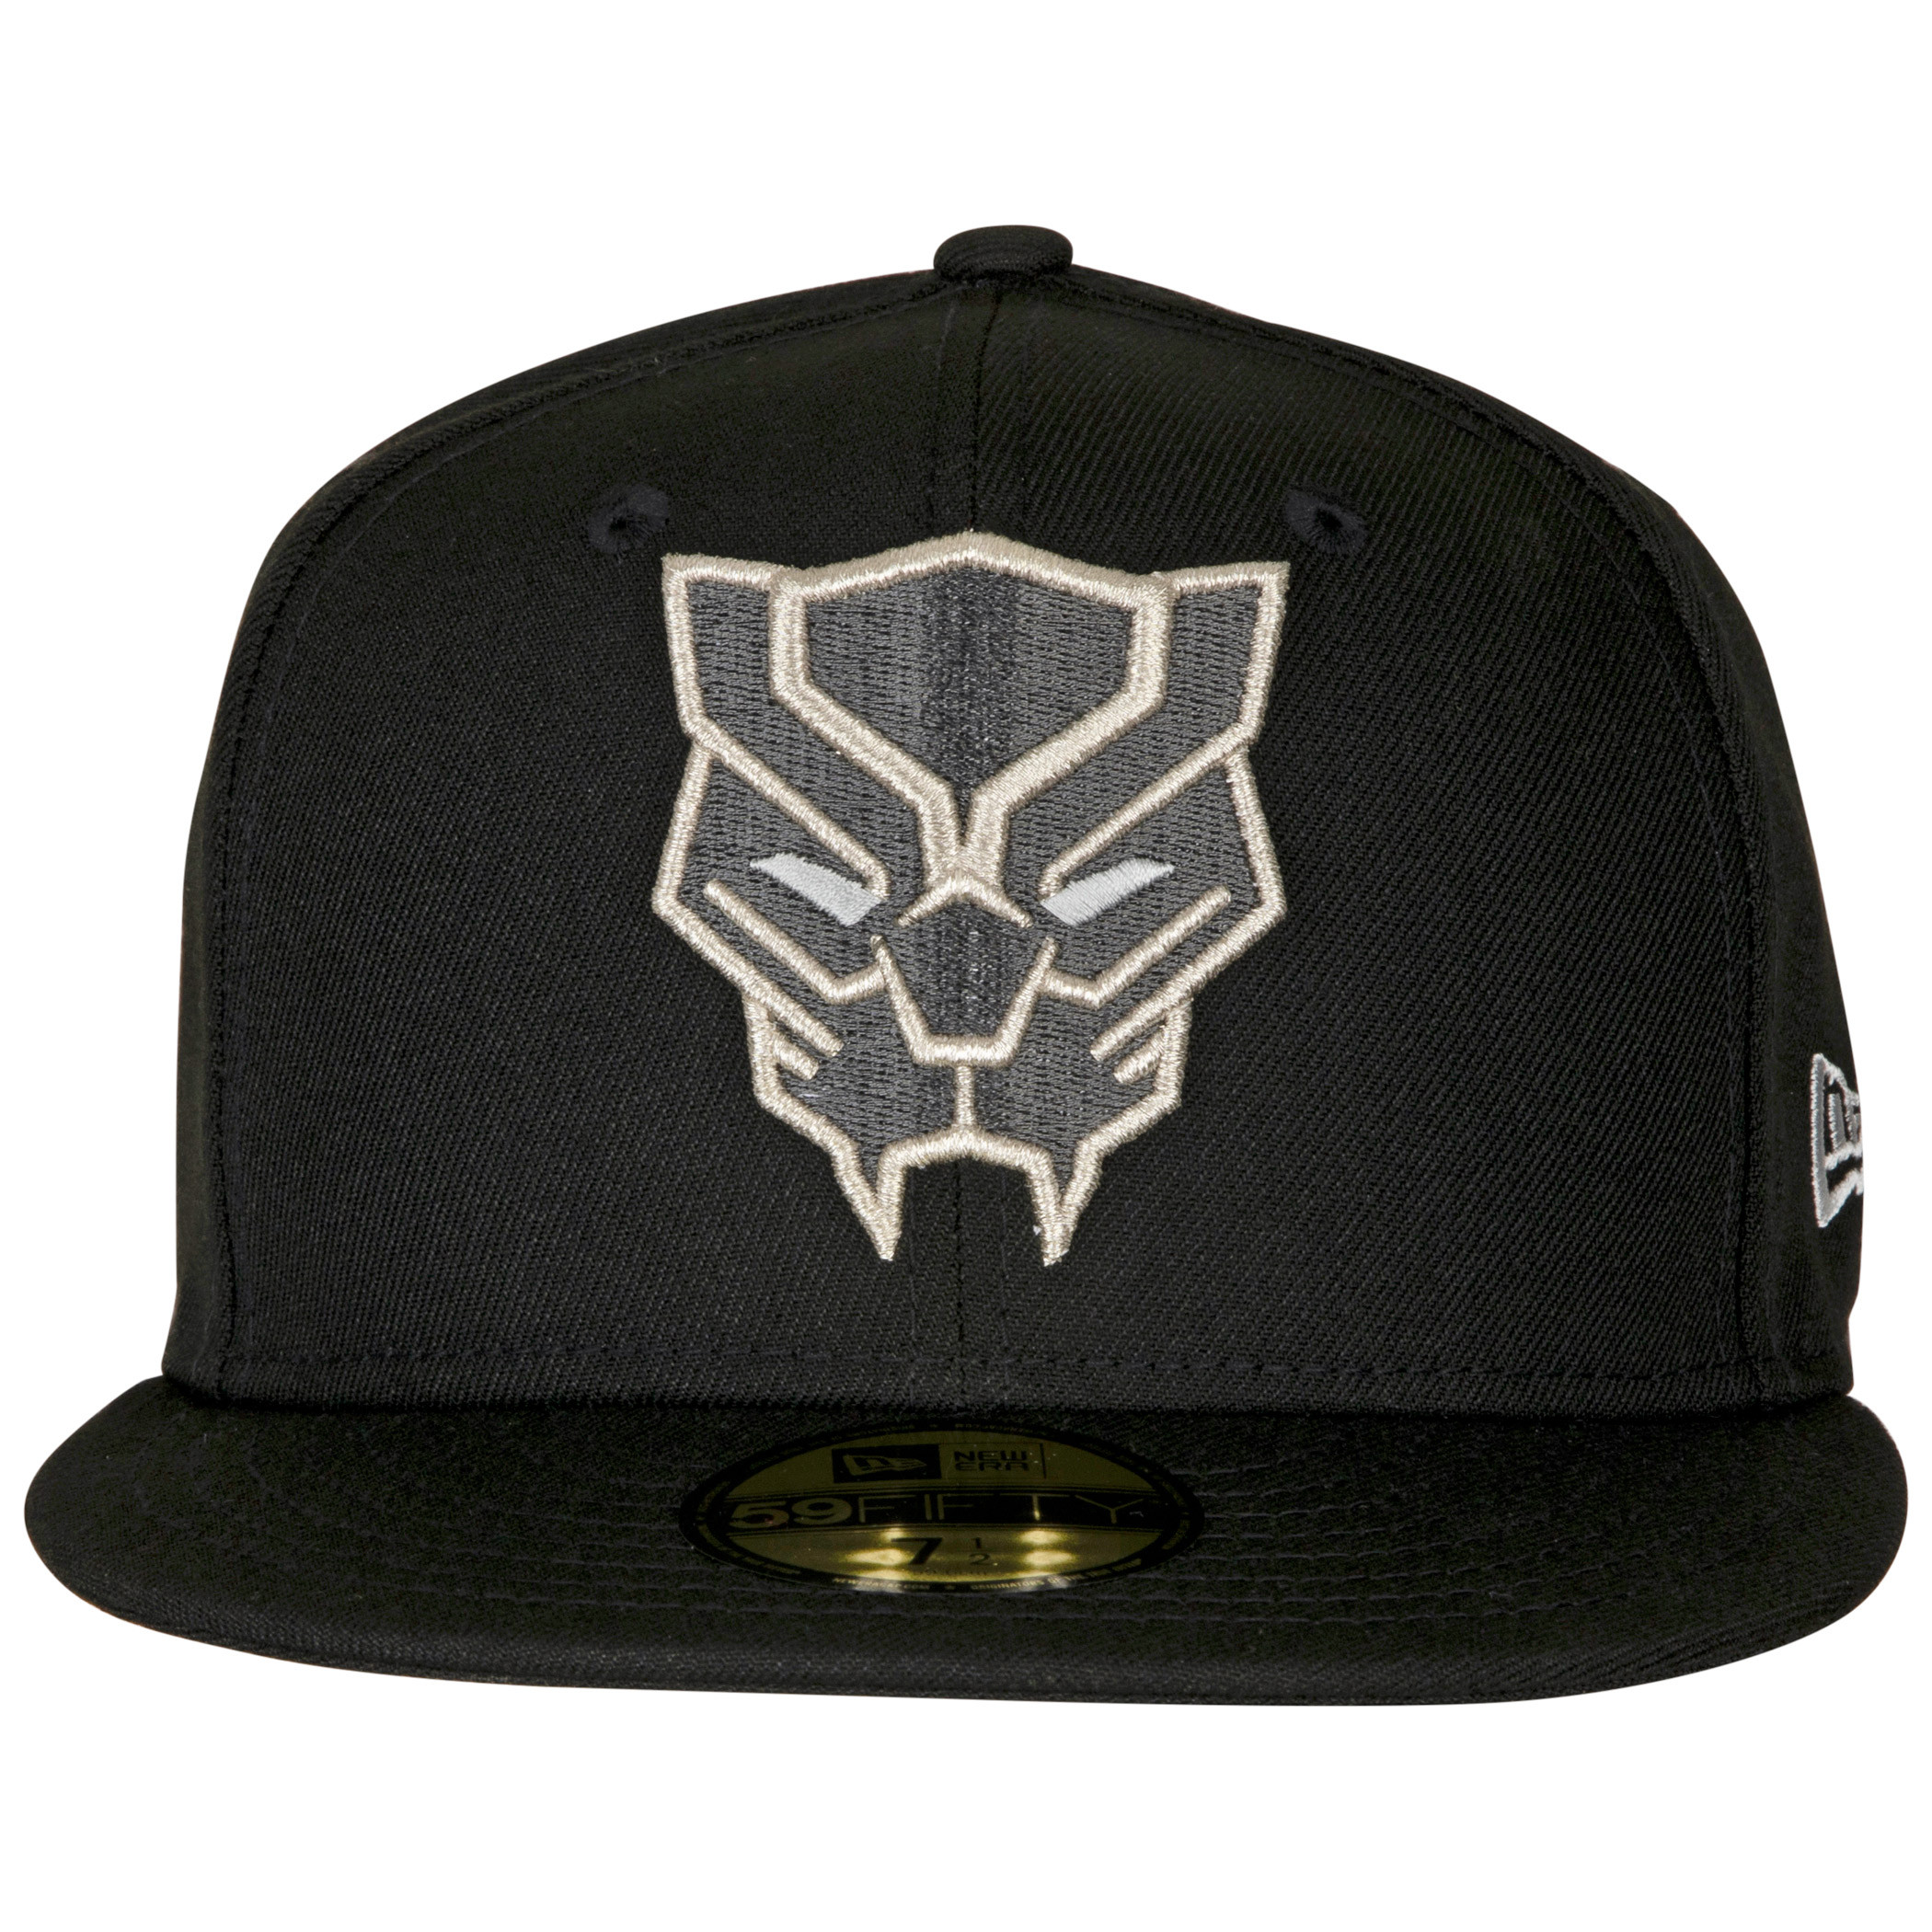 Black Panther Face Symbol Color Block New Era 59Fifty Fitted Hat